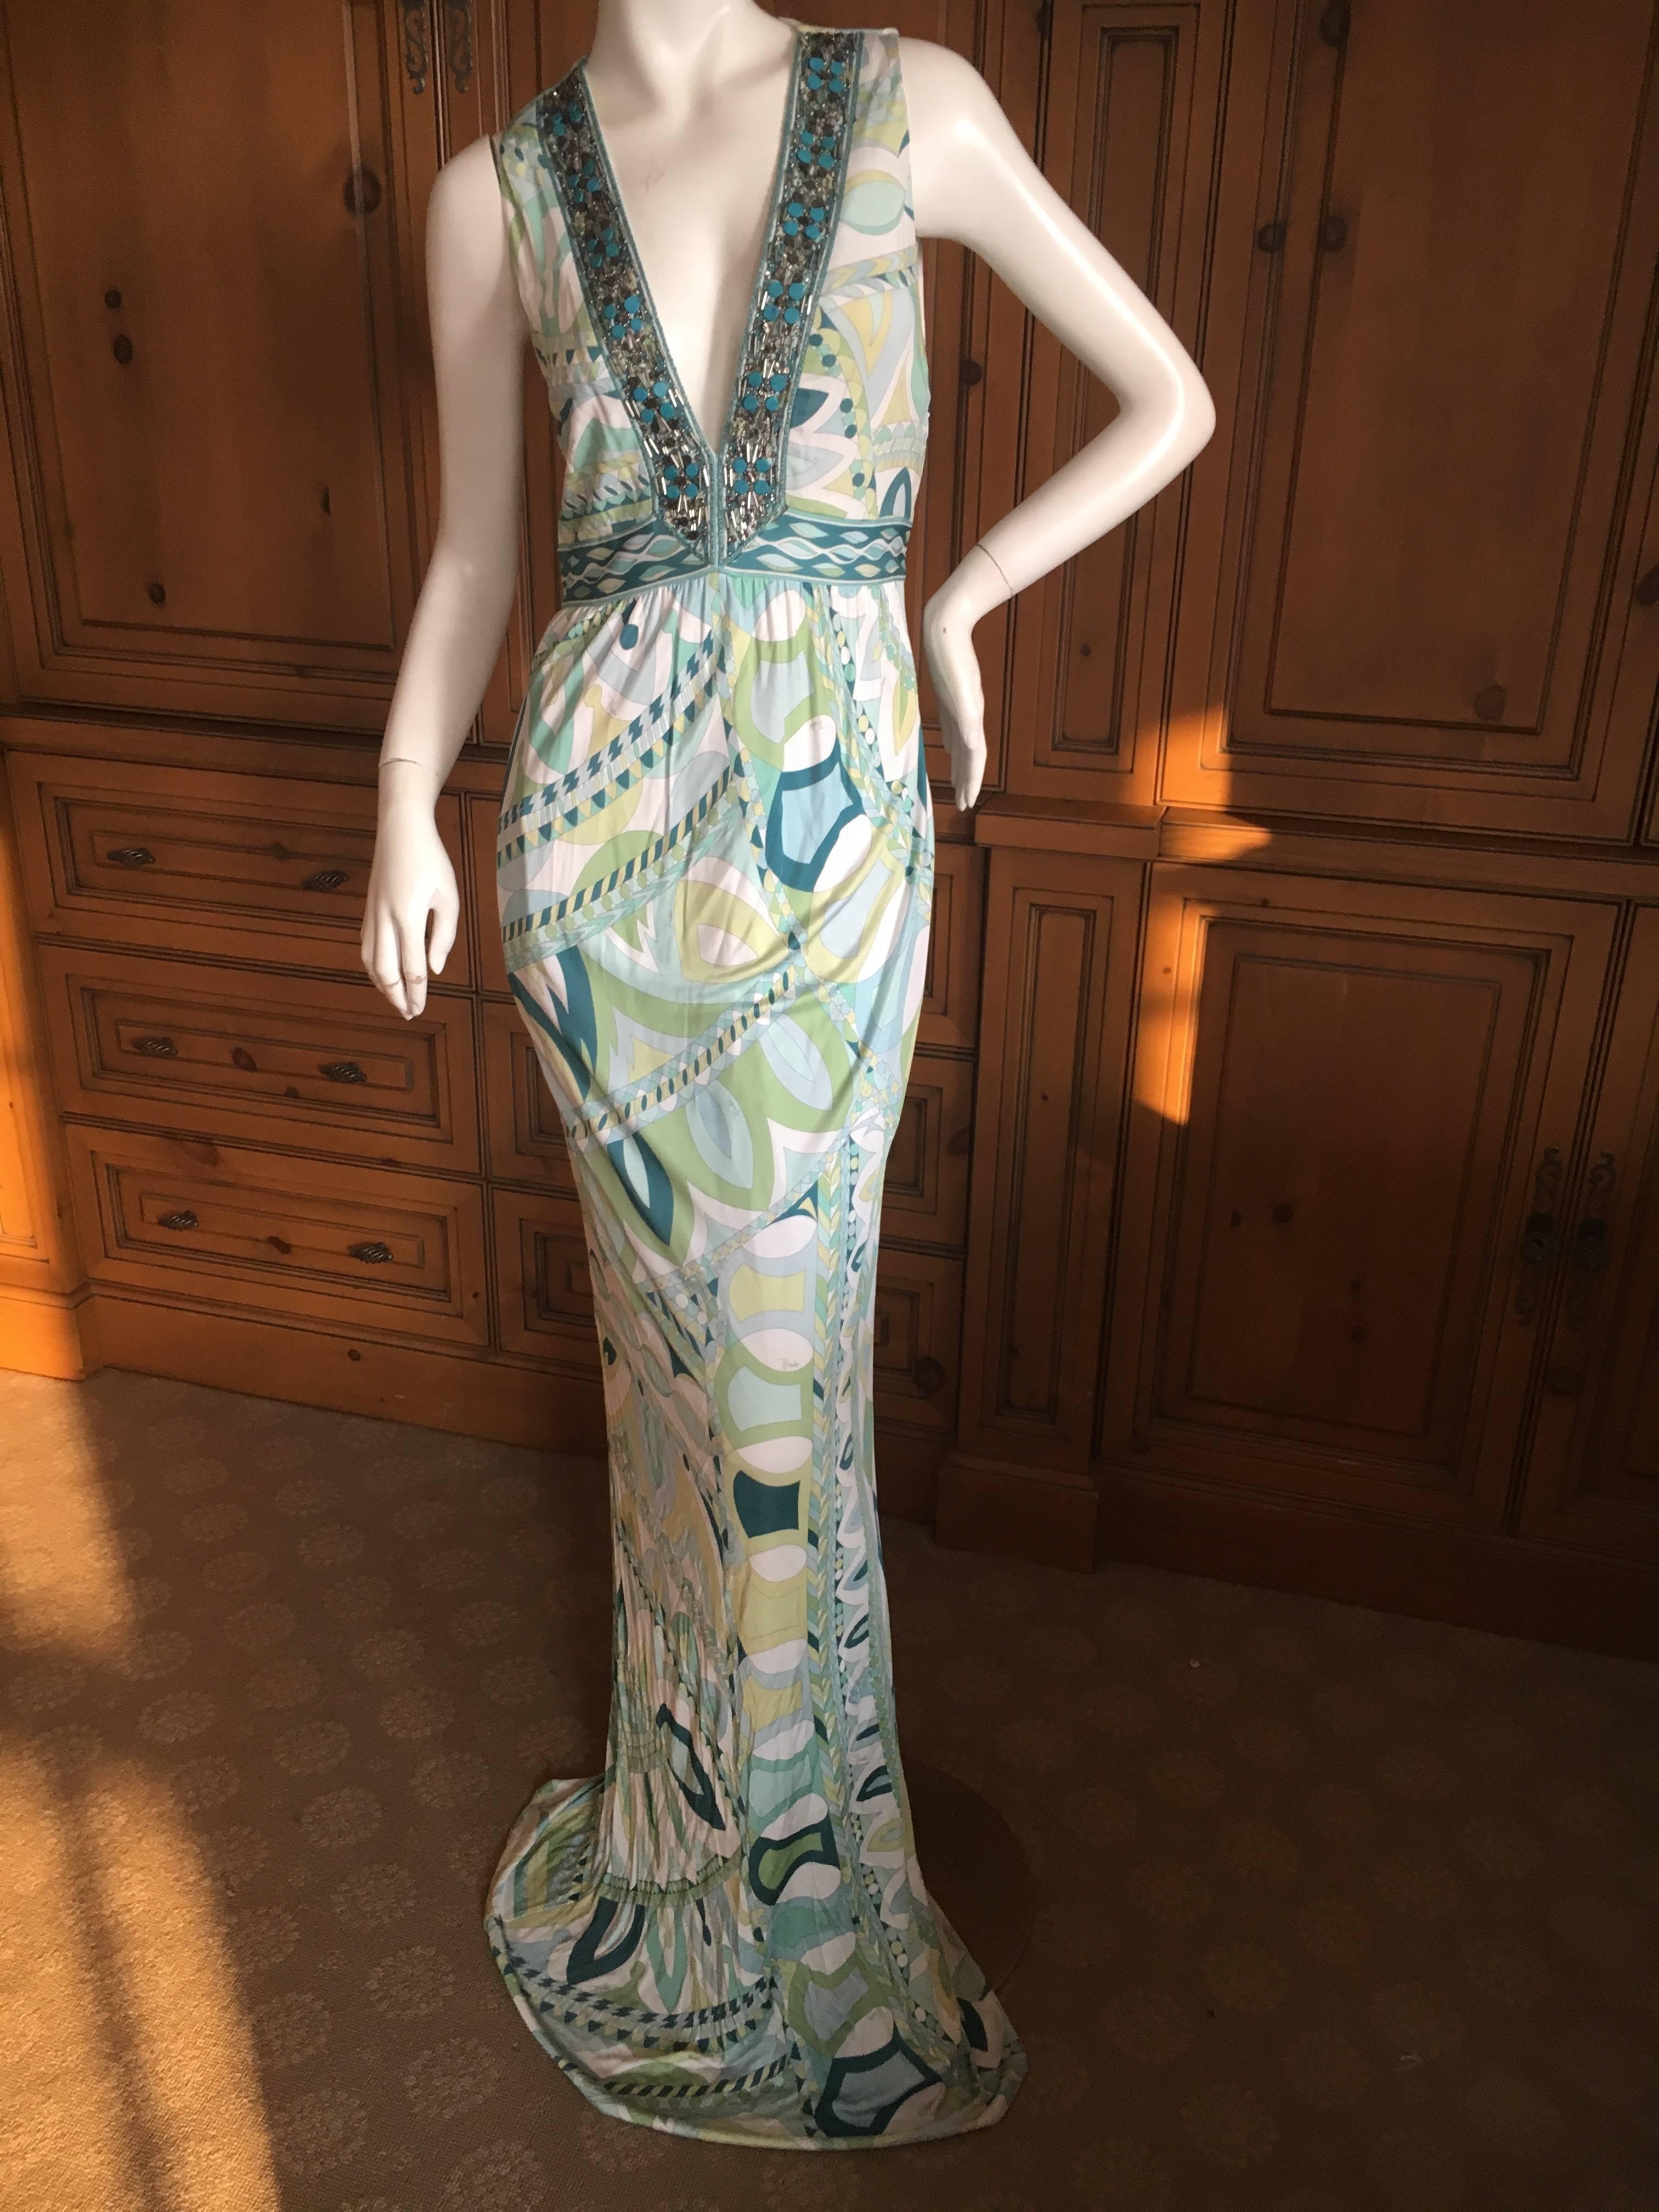 Emilio Pucci Bead Embellished Maxi Dress.
This is so much prettier in person, the embellishments didn't photograph well.
 New with Tags
Size 40
Bust 36